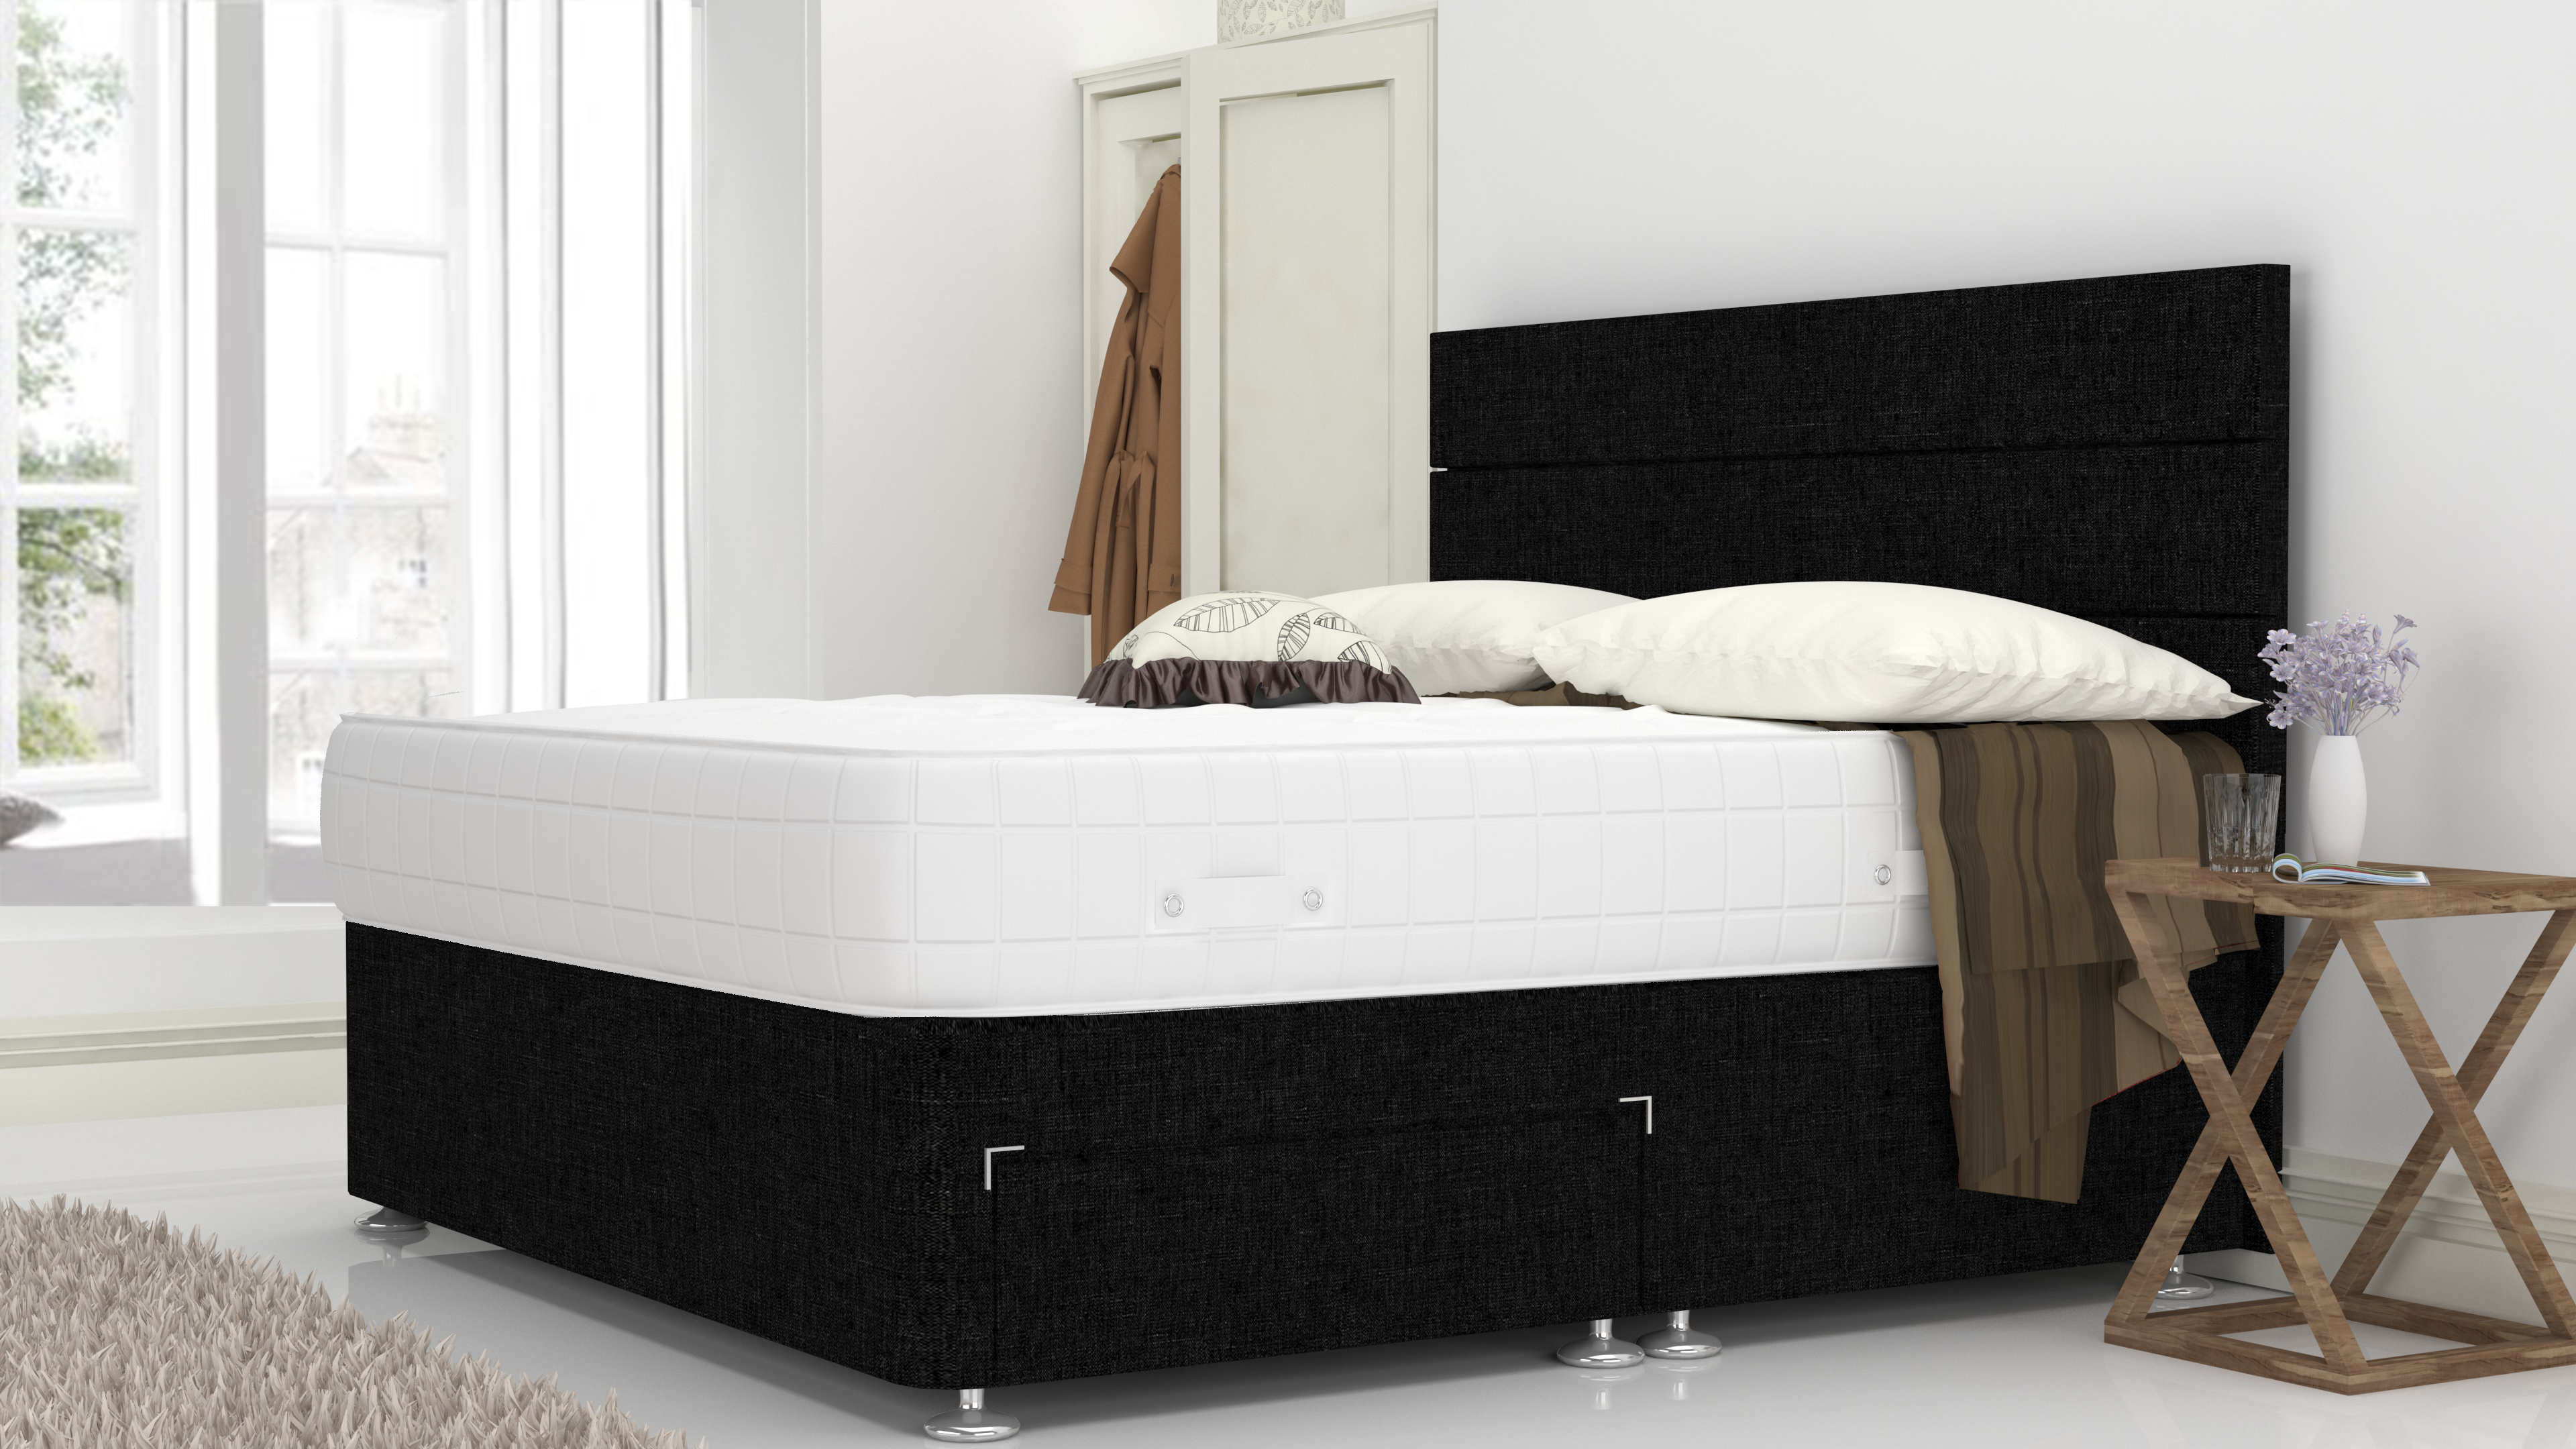 Black Venice 5 Feet Divan Bed Set With 3 Panel Headboard (Included Feet) And Free Pocket Sprung Mattress